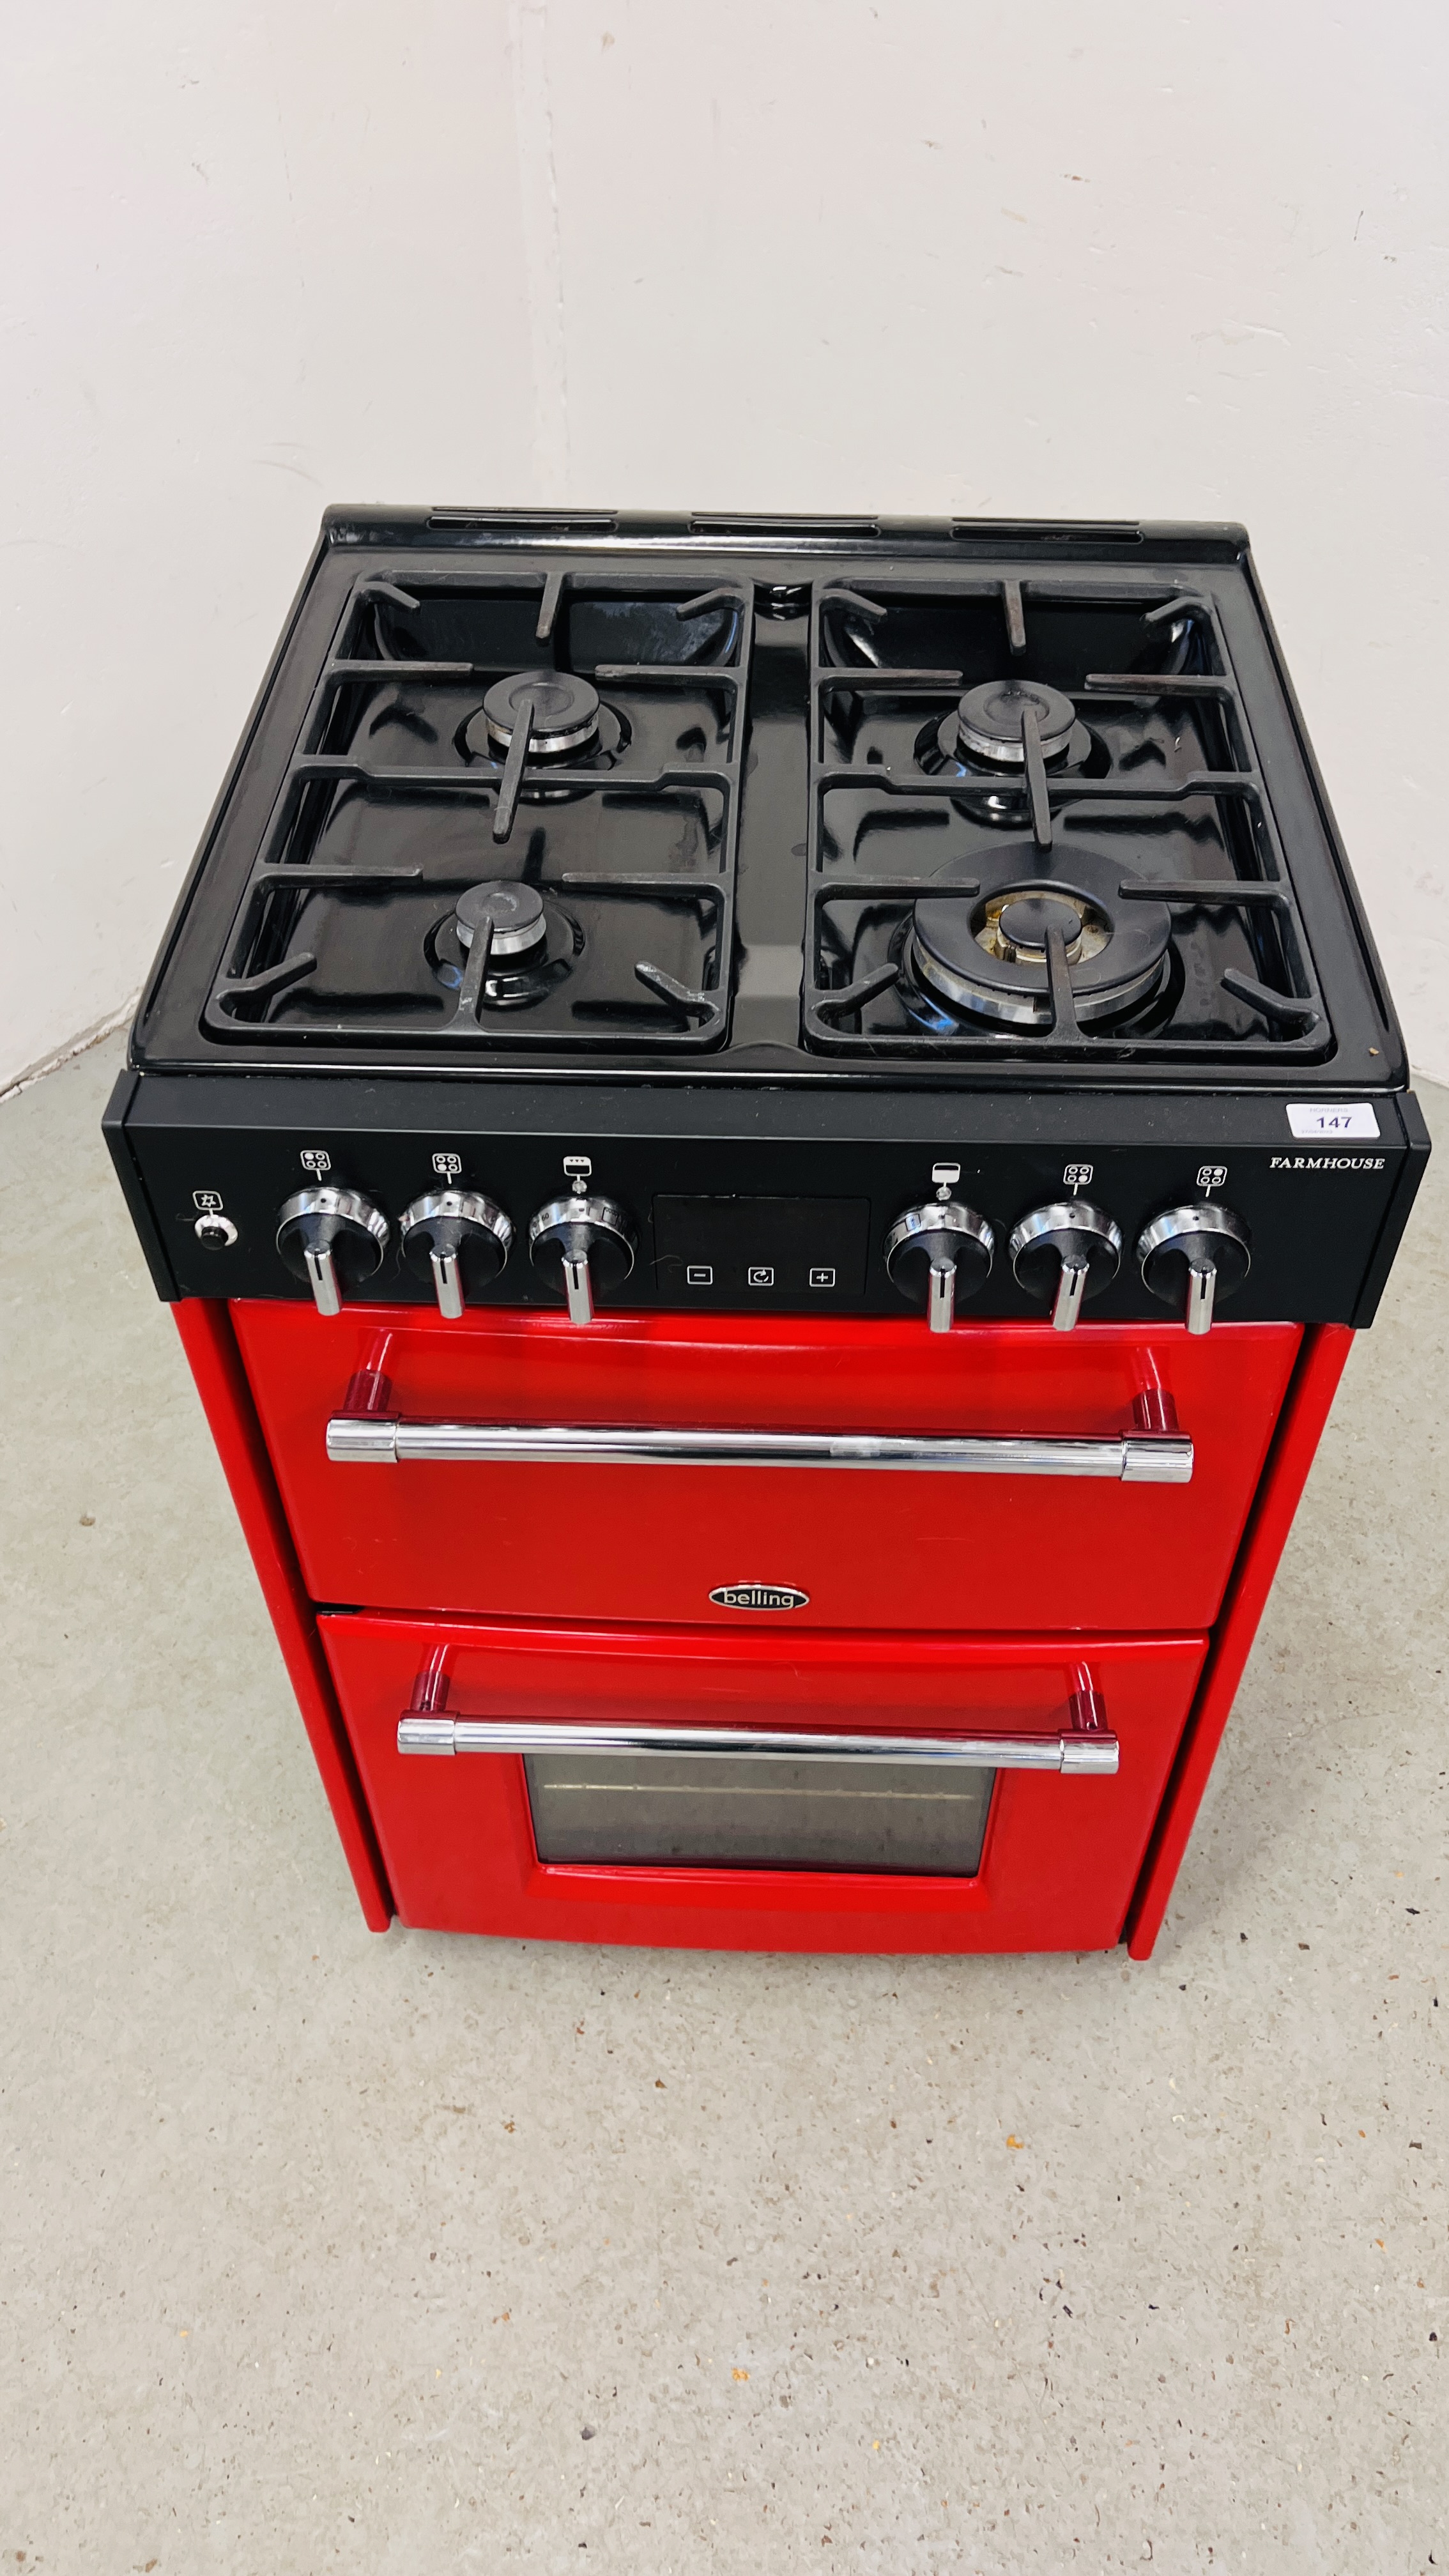 A BELLING "FARMHOUSE" MAINS GAS HOB, ELECTRIC SLOT IN COOKER FINISHED IN "HOT JALAPENO" RED, - Image 2 of 11